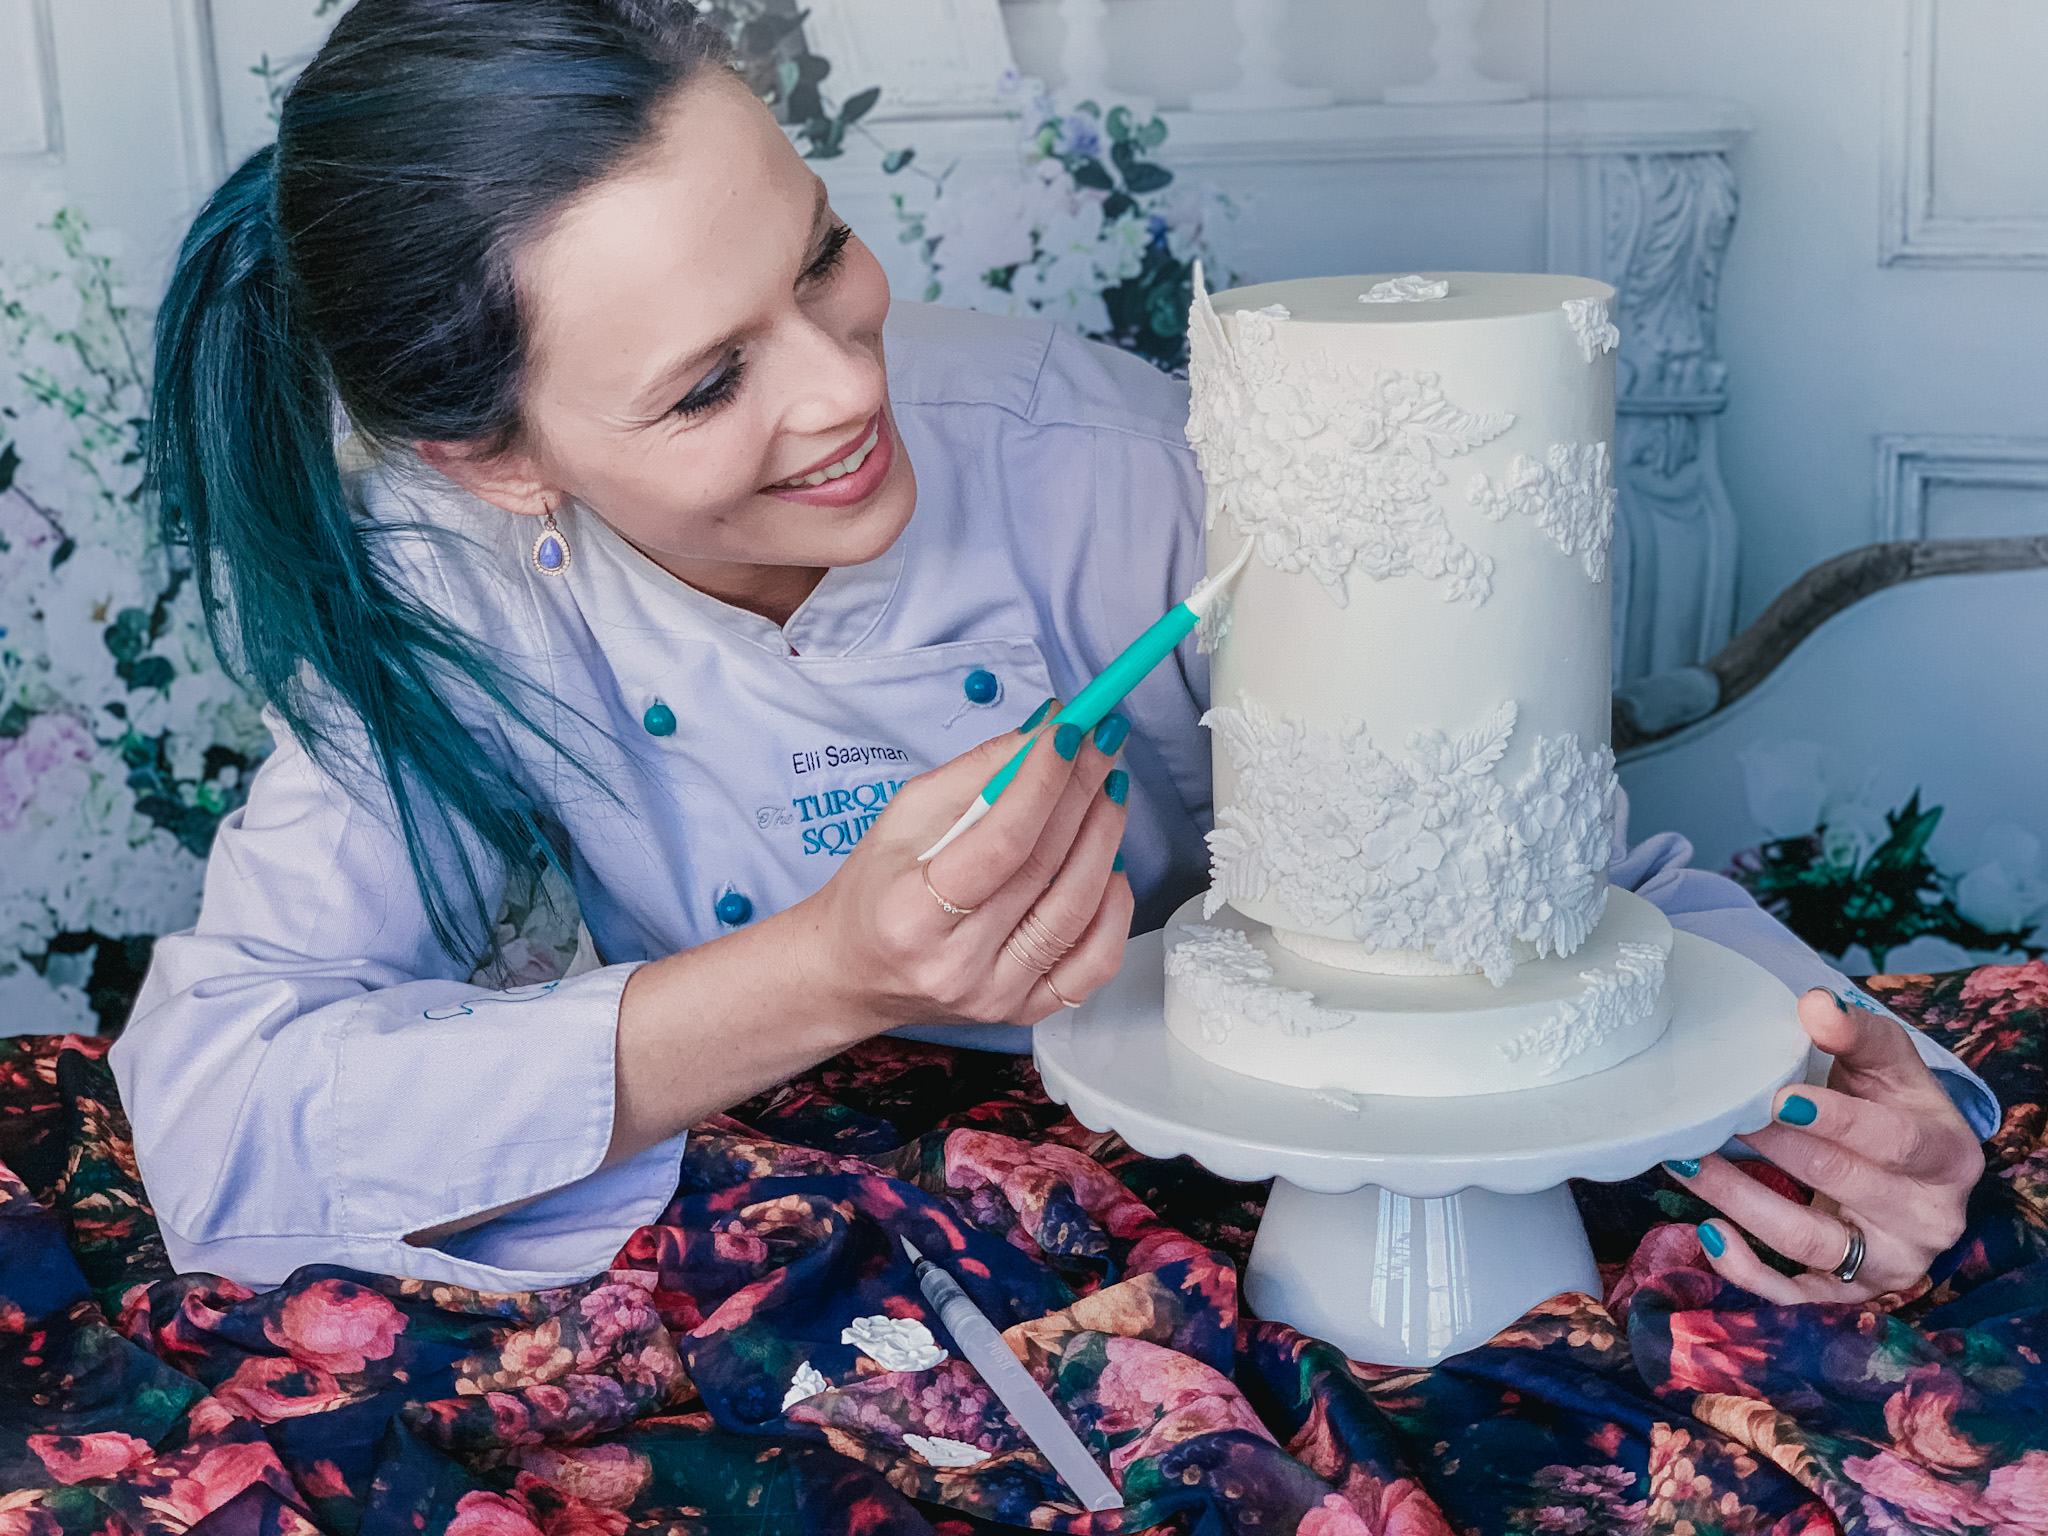 Bas Relief Designs for gorgeous Cakes | The Turquoise Squirrel